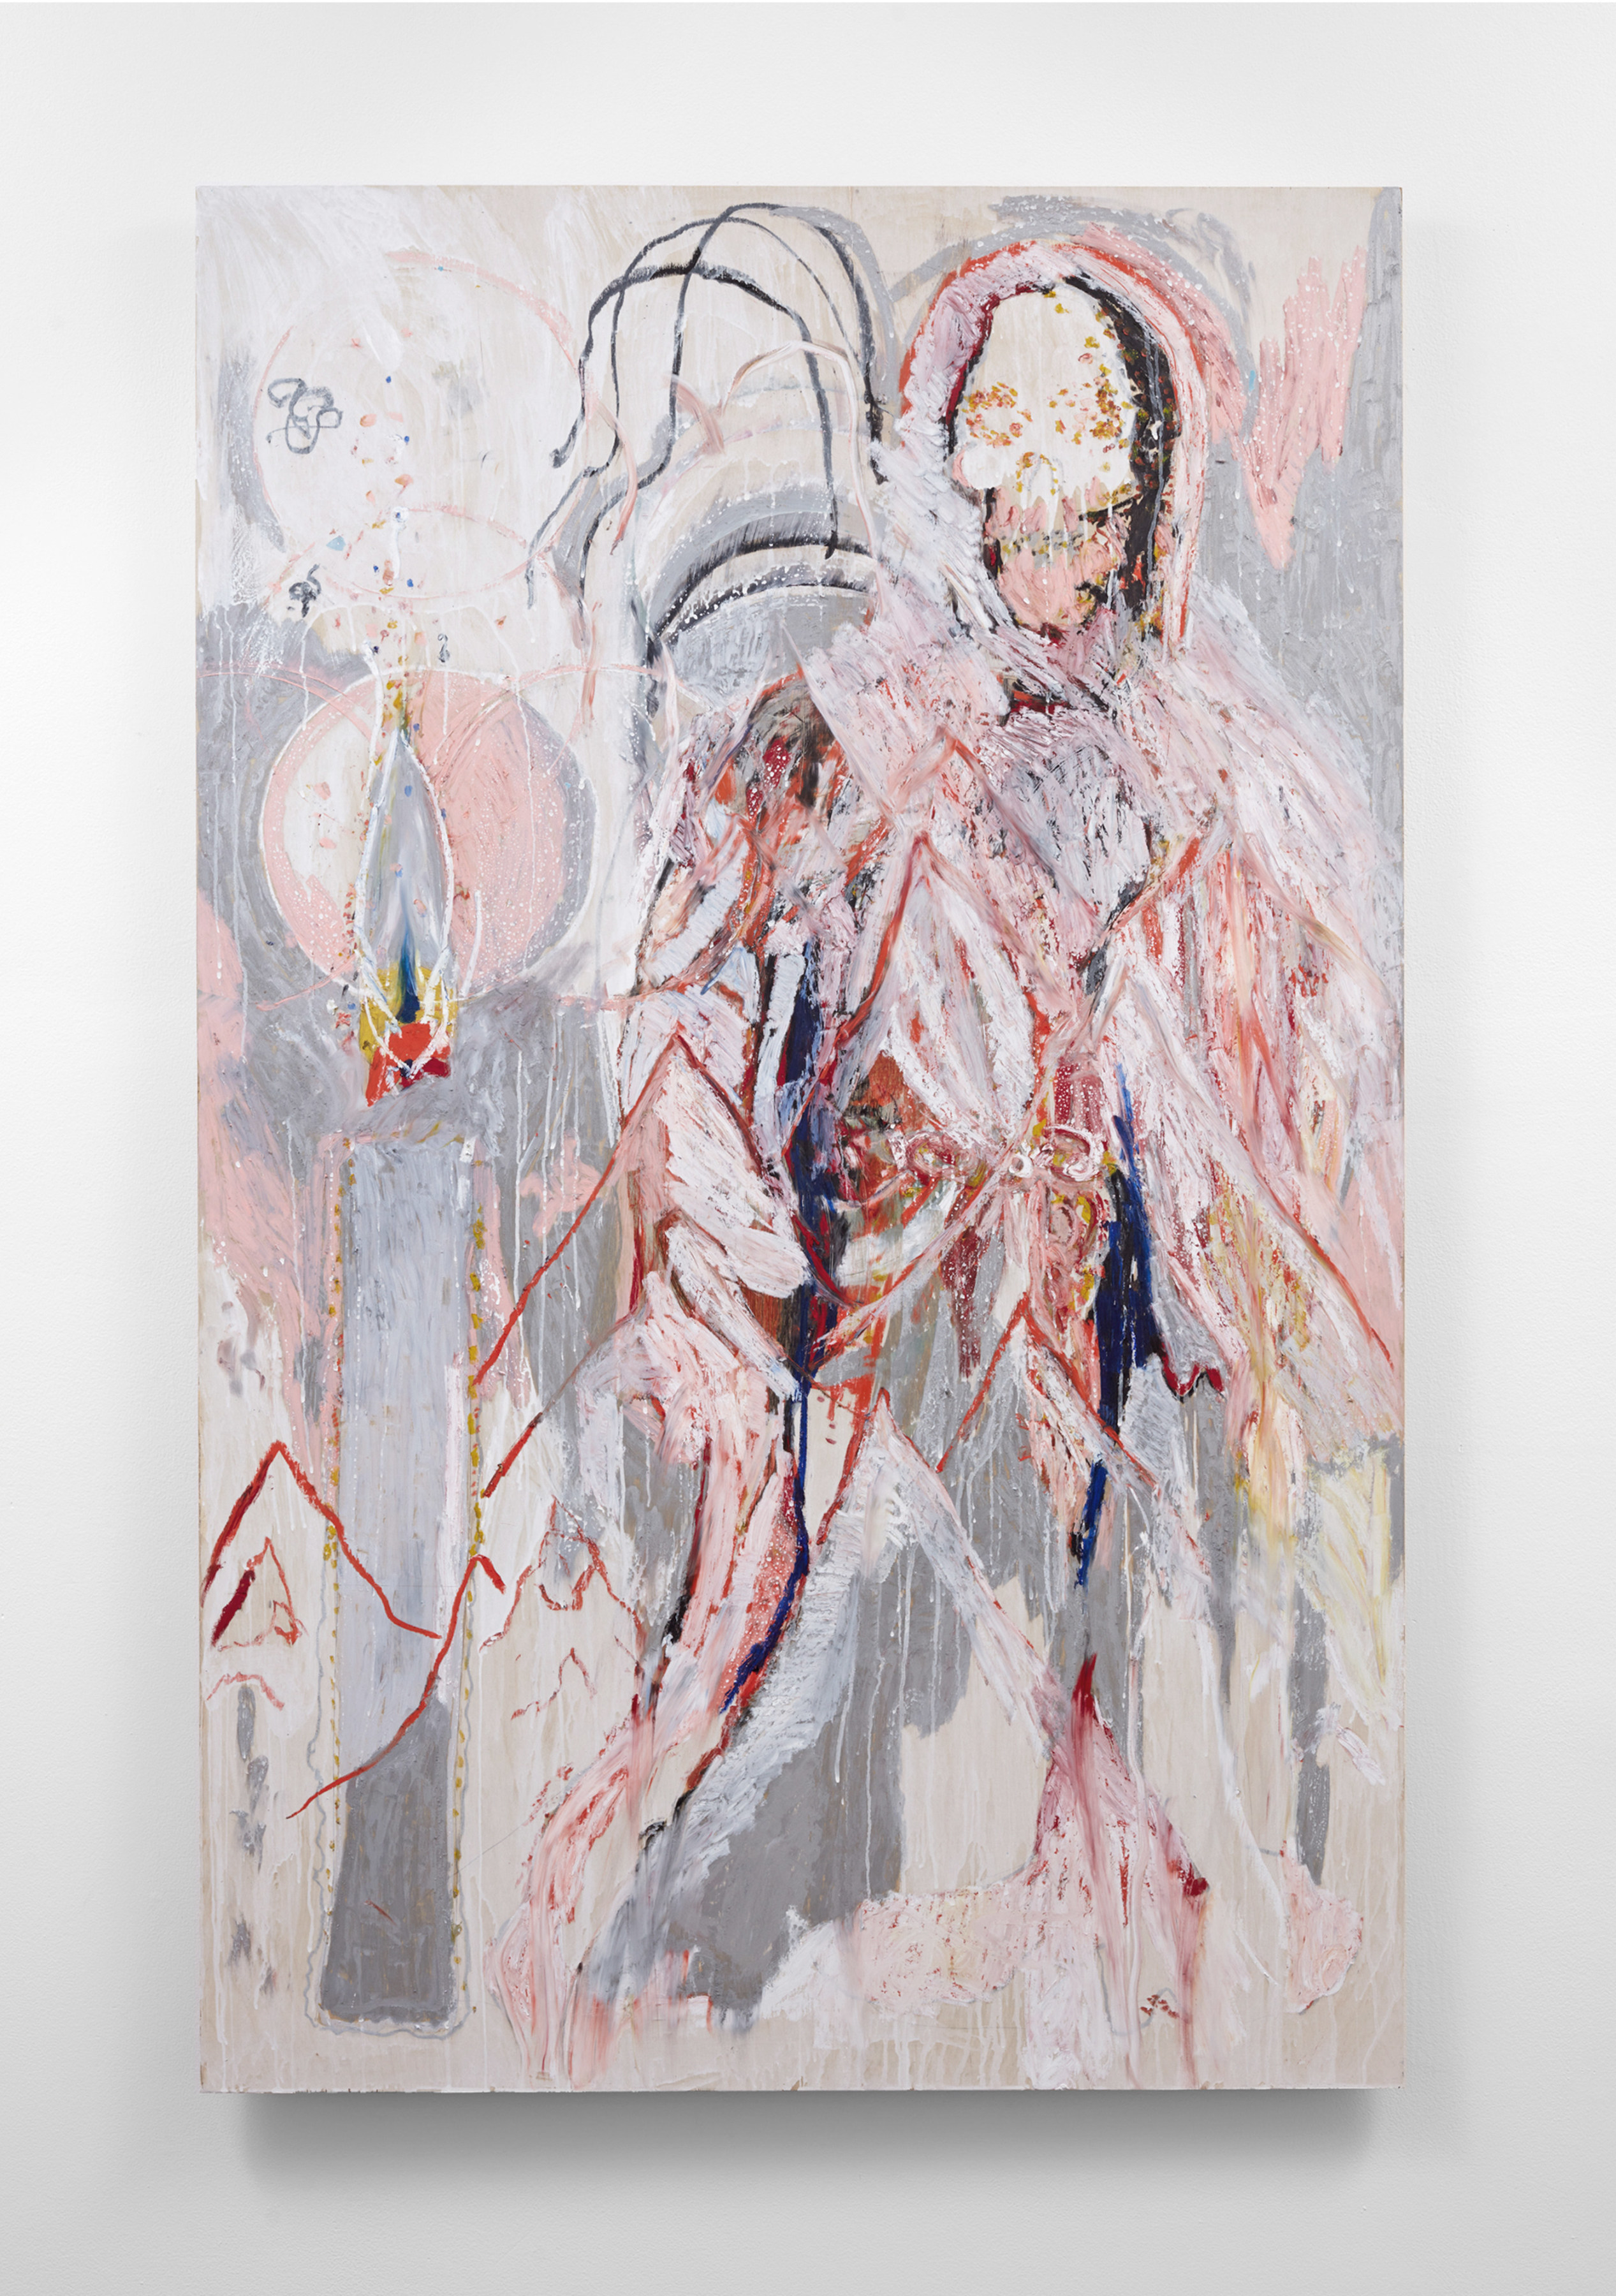 An oil stick on wood panel painting of a loosely rendered reaper rendered in pink, grey and red enmeshed in a mountainous landscape and a large candle. 